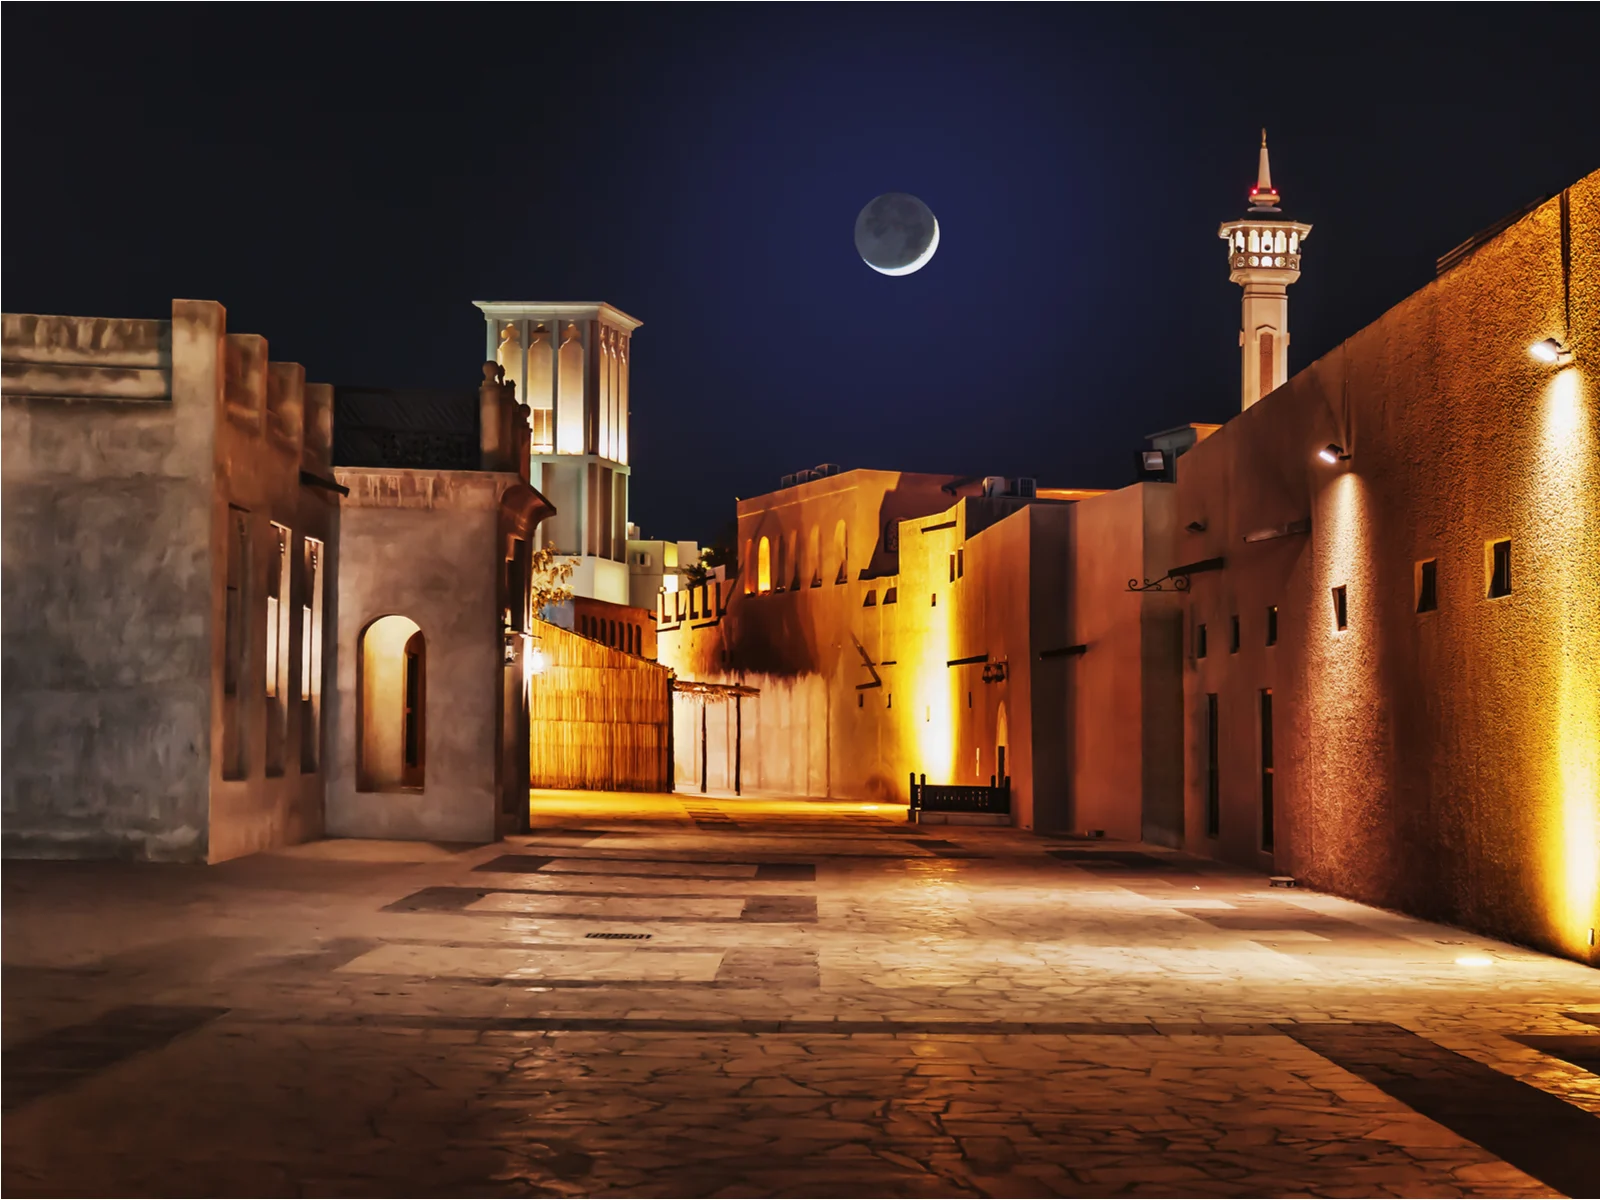 For a piece titled Is Dubai Safe, the old arab city pictured at night with the moon in full view